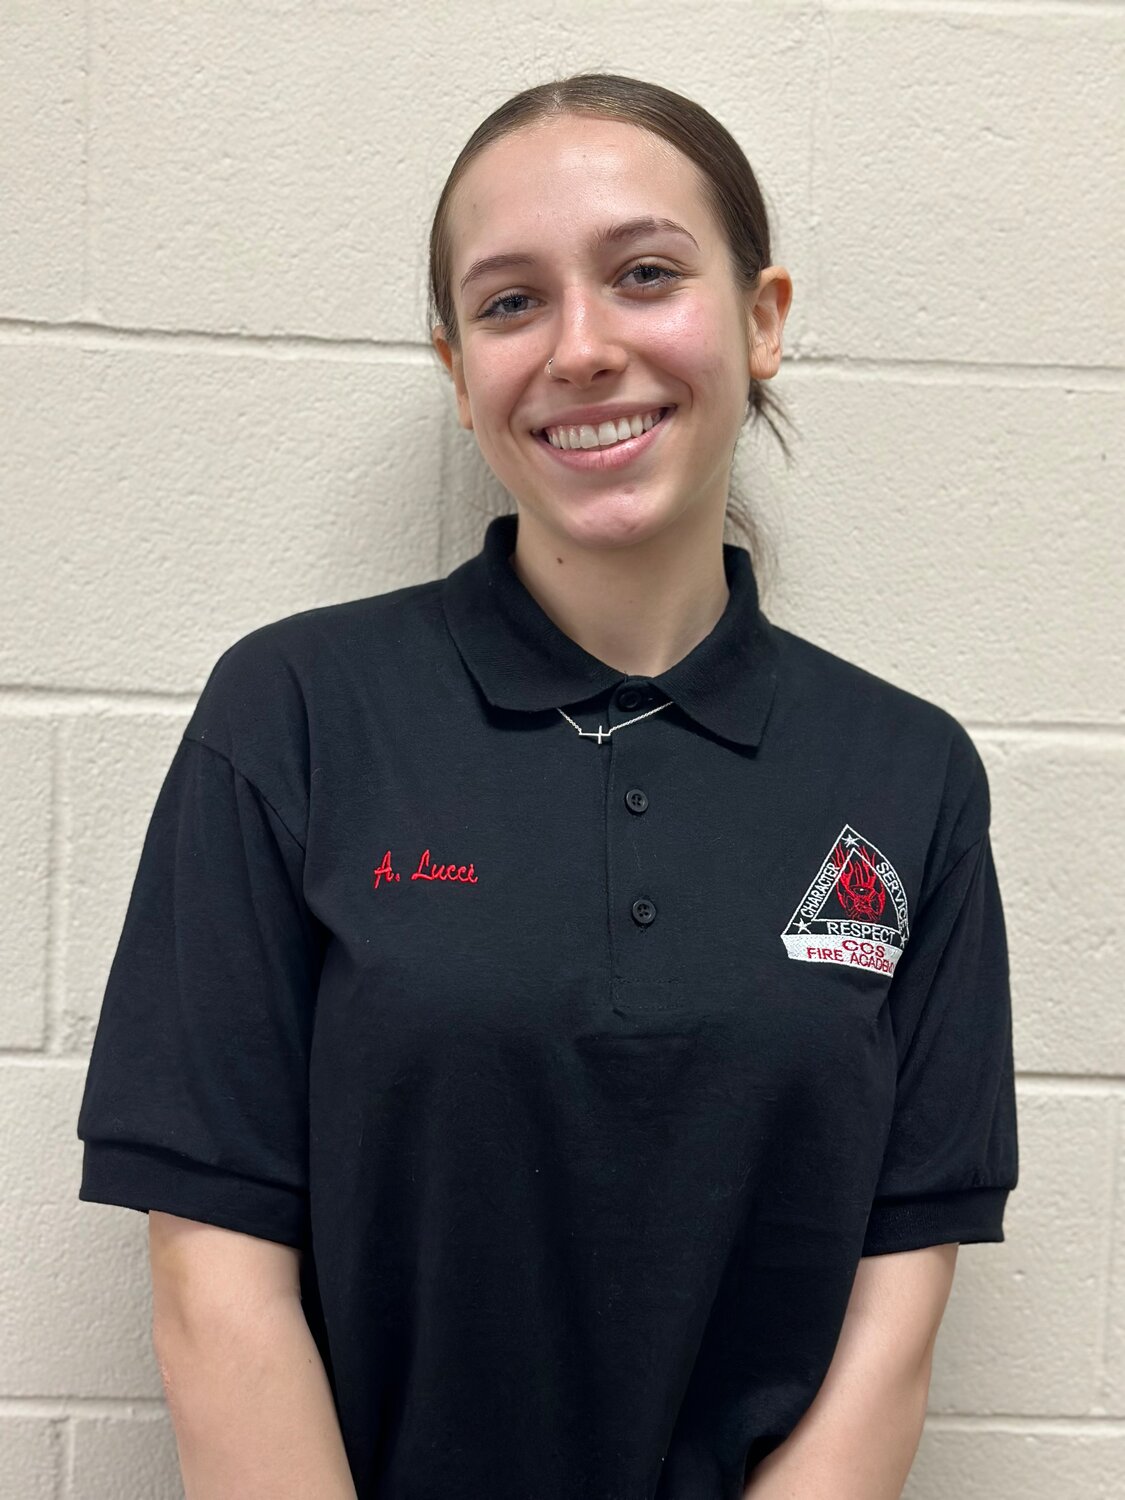 Aliyah Lucci, 17, is a junior at Jack Britt High School who participates in the Cumberland County Schools Fire Academy. She told CityView the program has helped her mature.